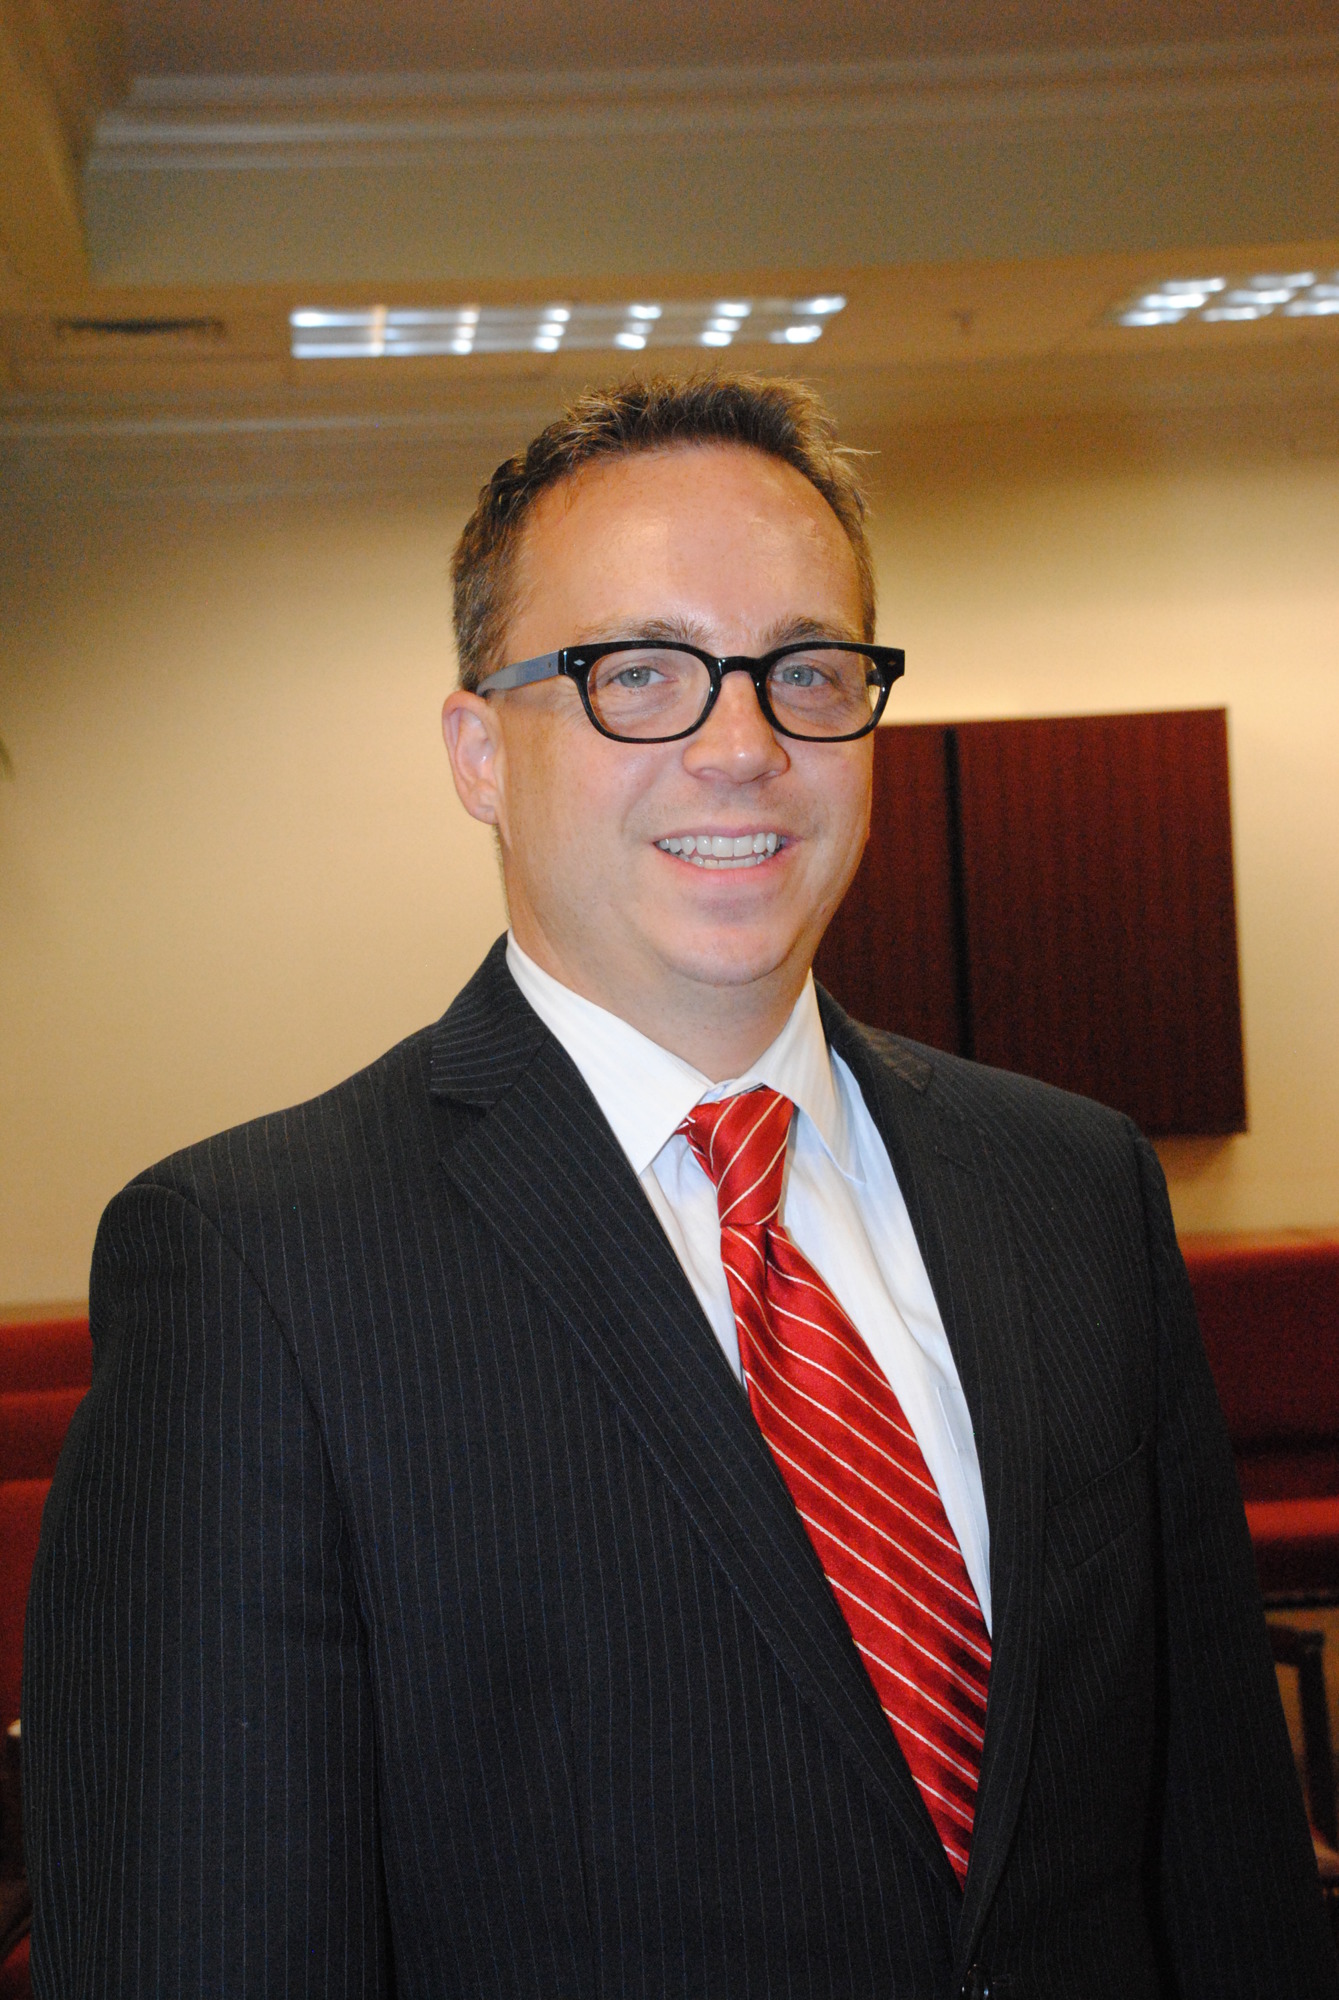 The newest member of the board, Stephen Fancher is an avid musician and is  financial advisor.